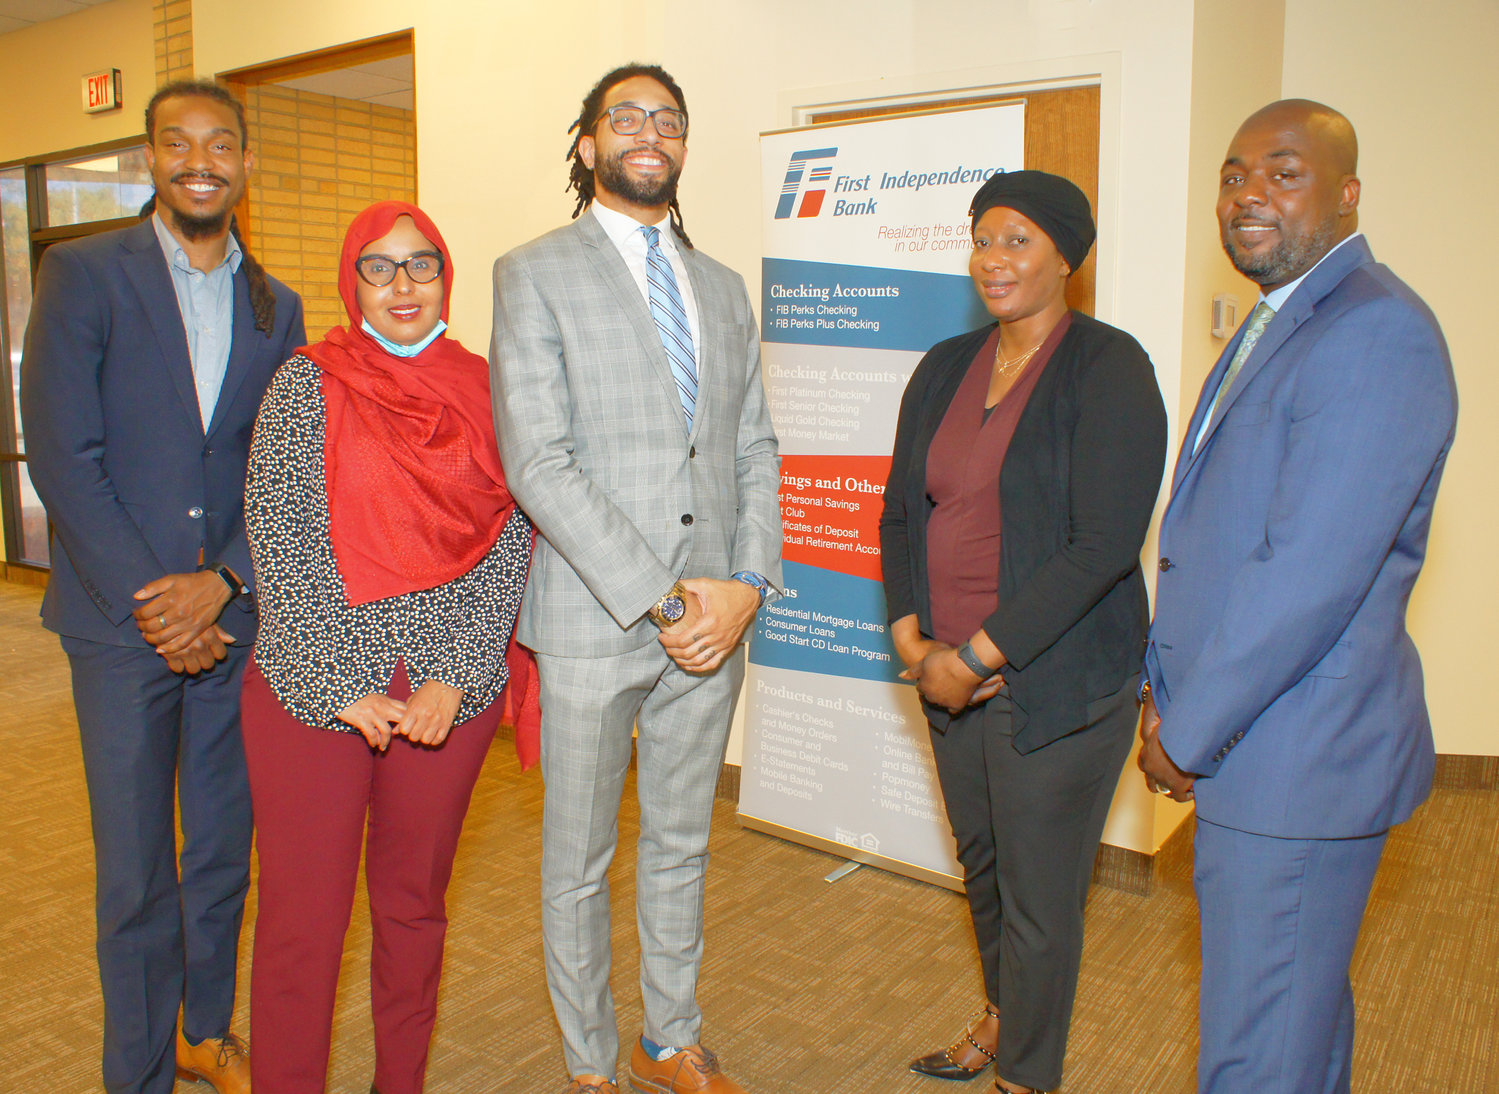 First Independence Bank staff include (left to right) Vachel Hudson, Deqa Noor, Andrew Ndekwe, Auntymetta Colley, and Damon Jenkins. (Photo by Terry Faust)